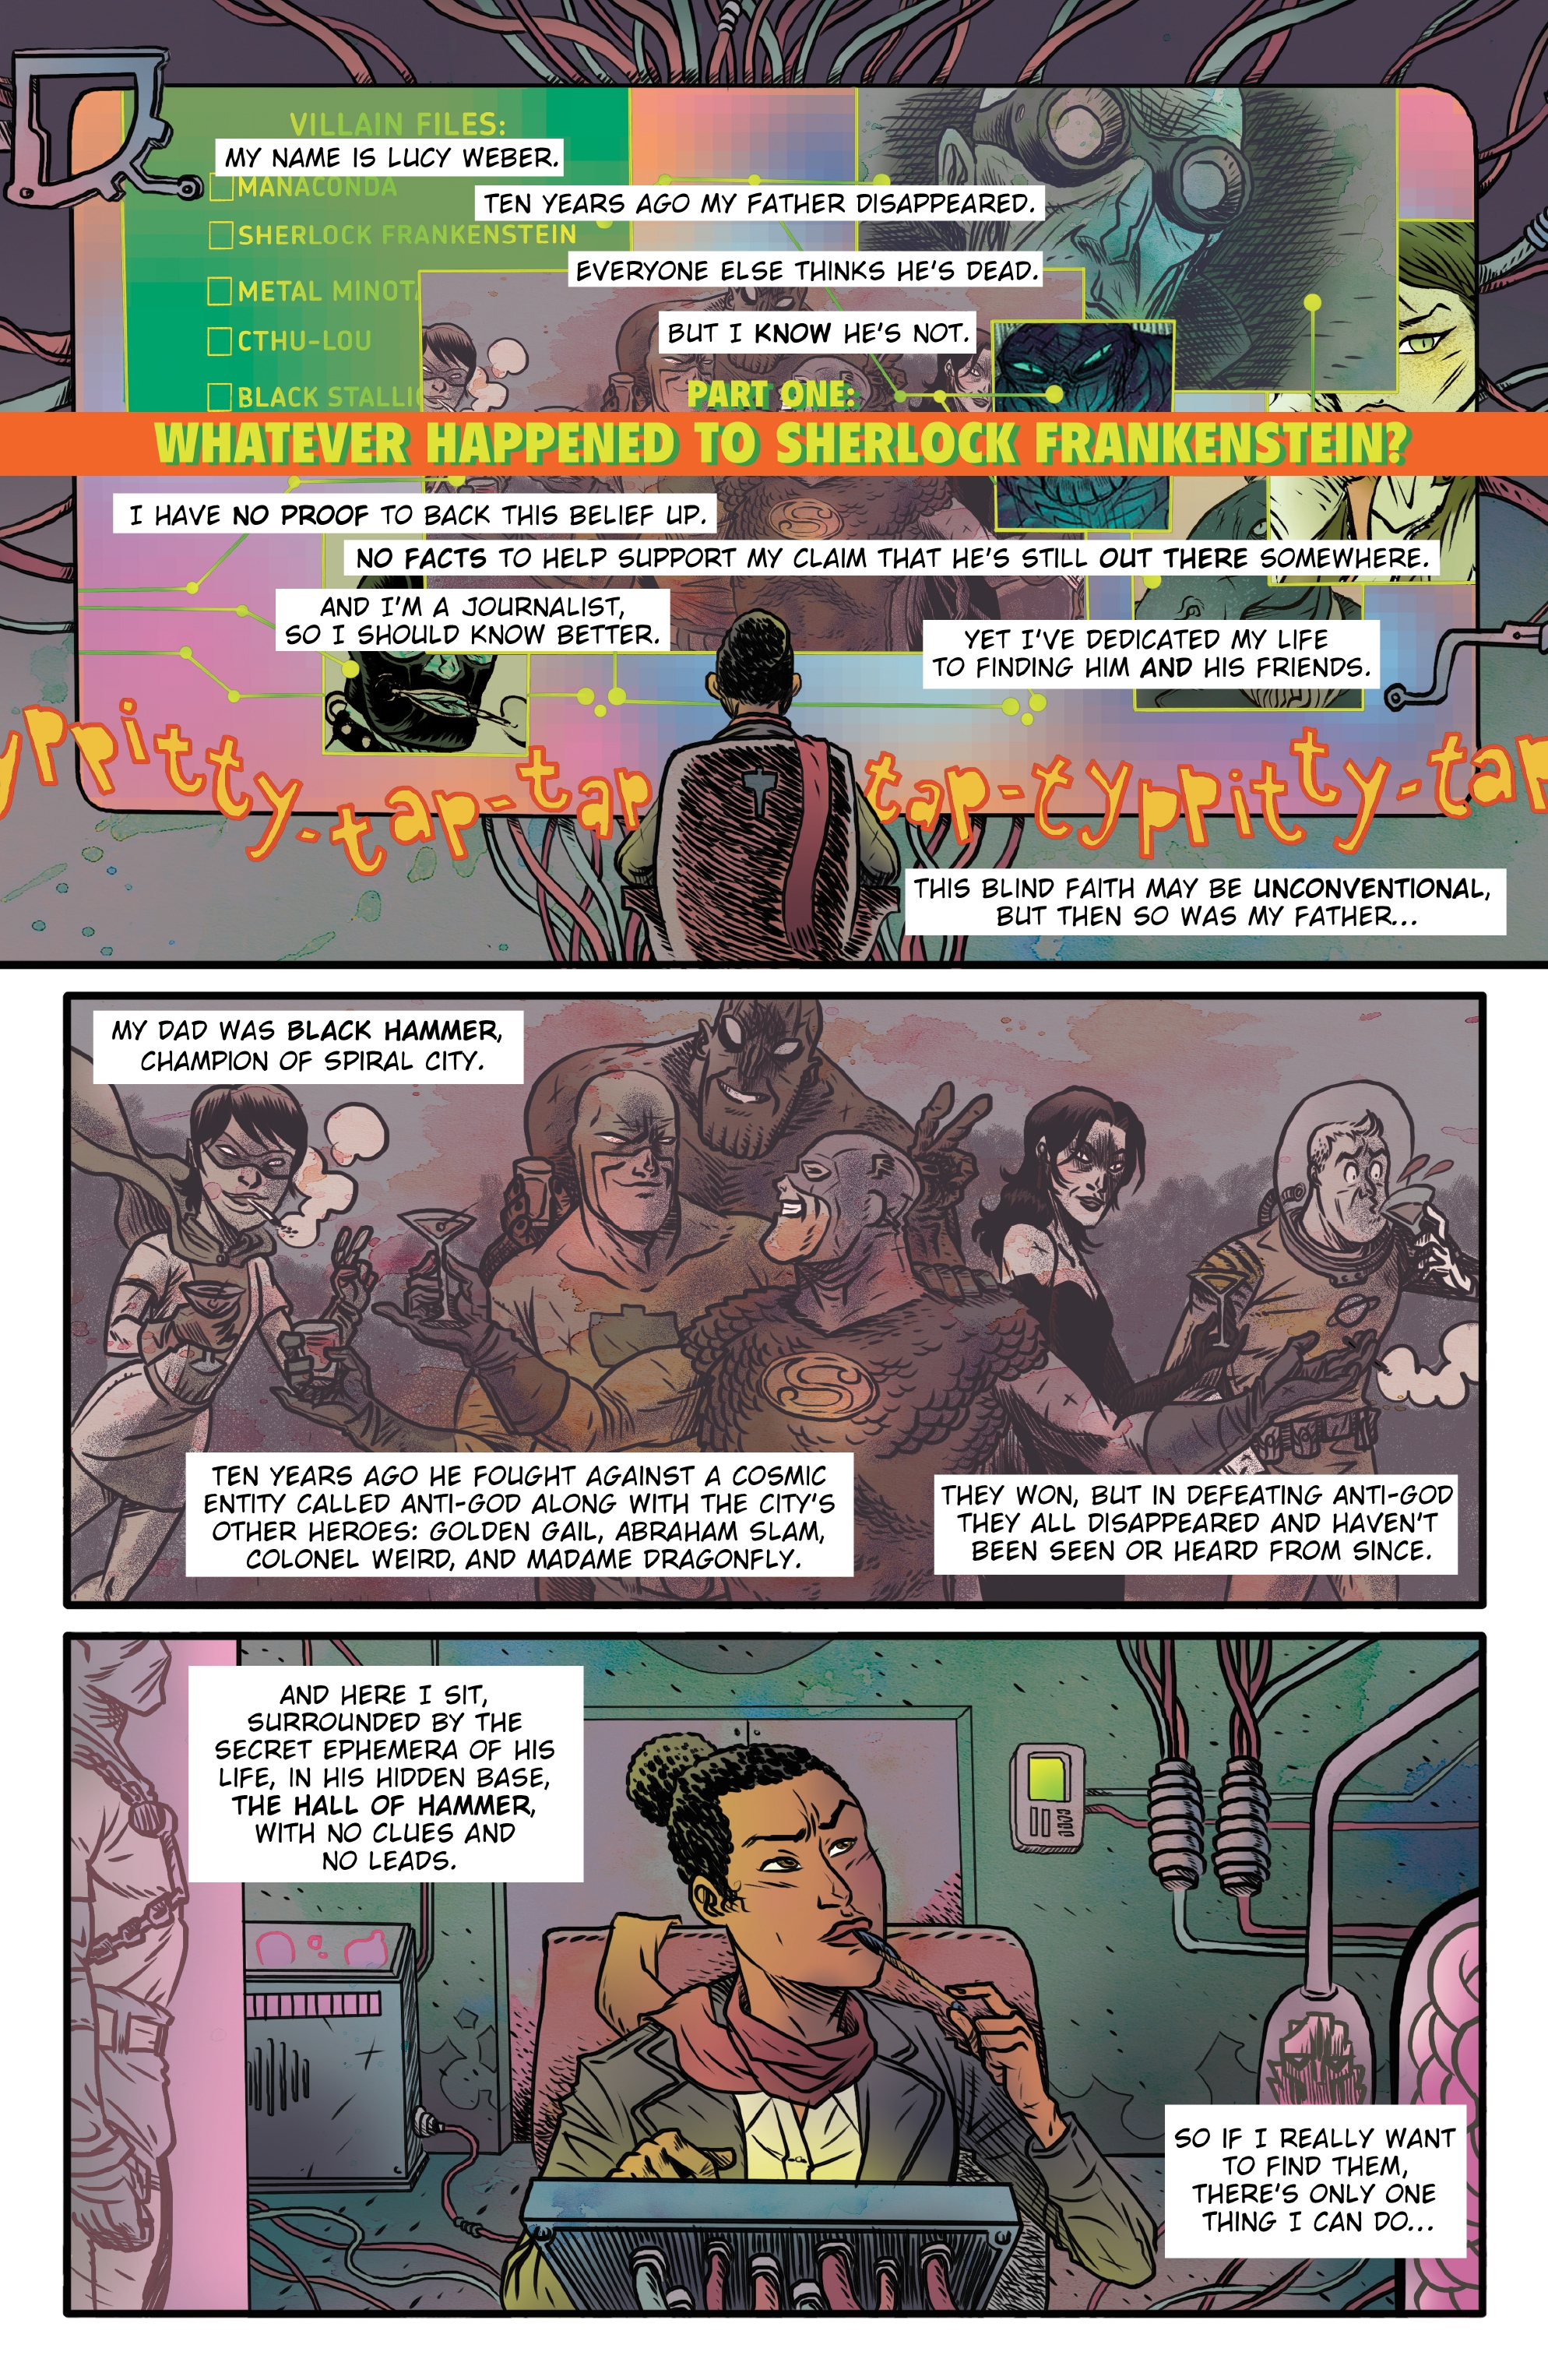 Sherlock Frankenstein & The Legion of Evil: From the World of Black Hammer : Chapter 1 - Page 3